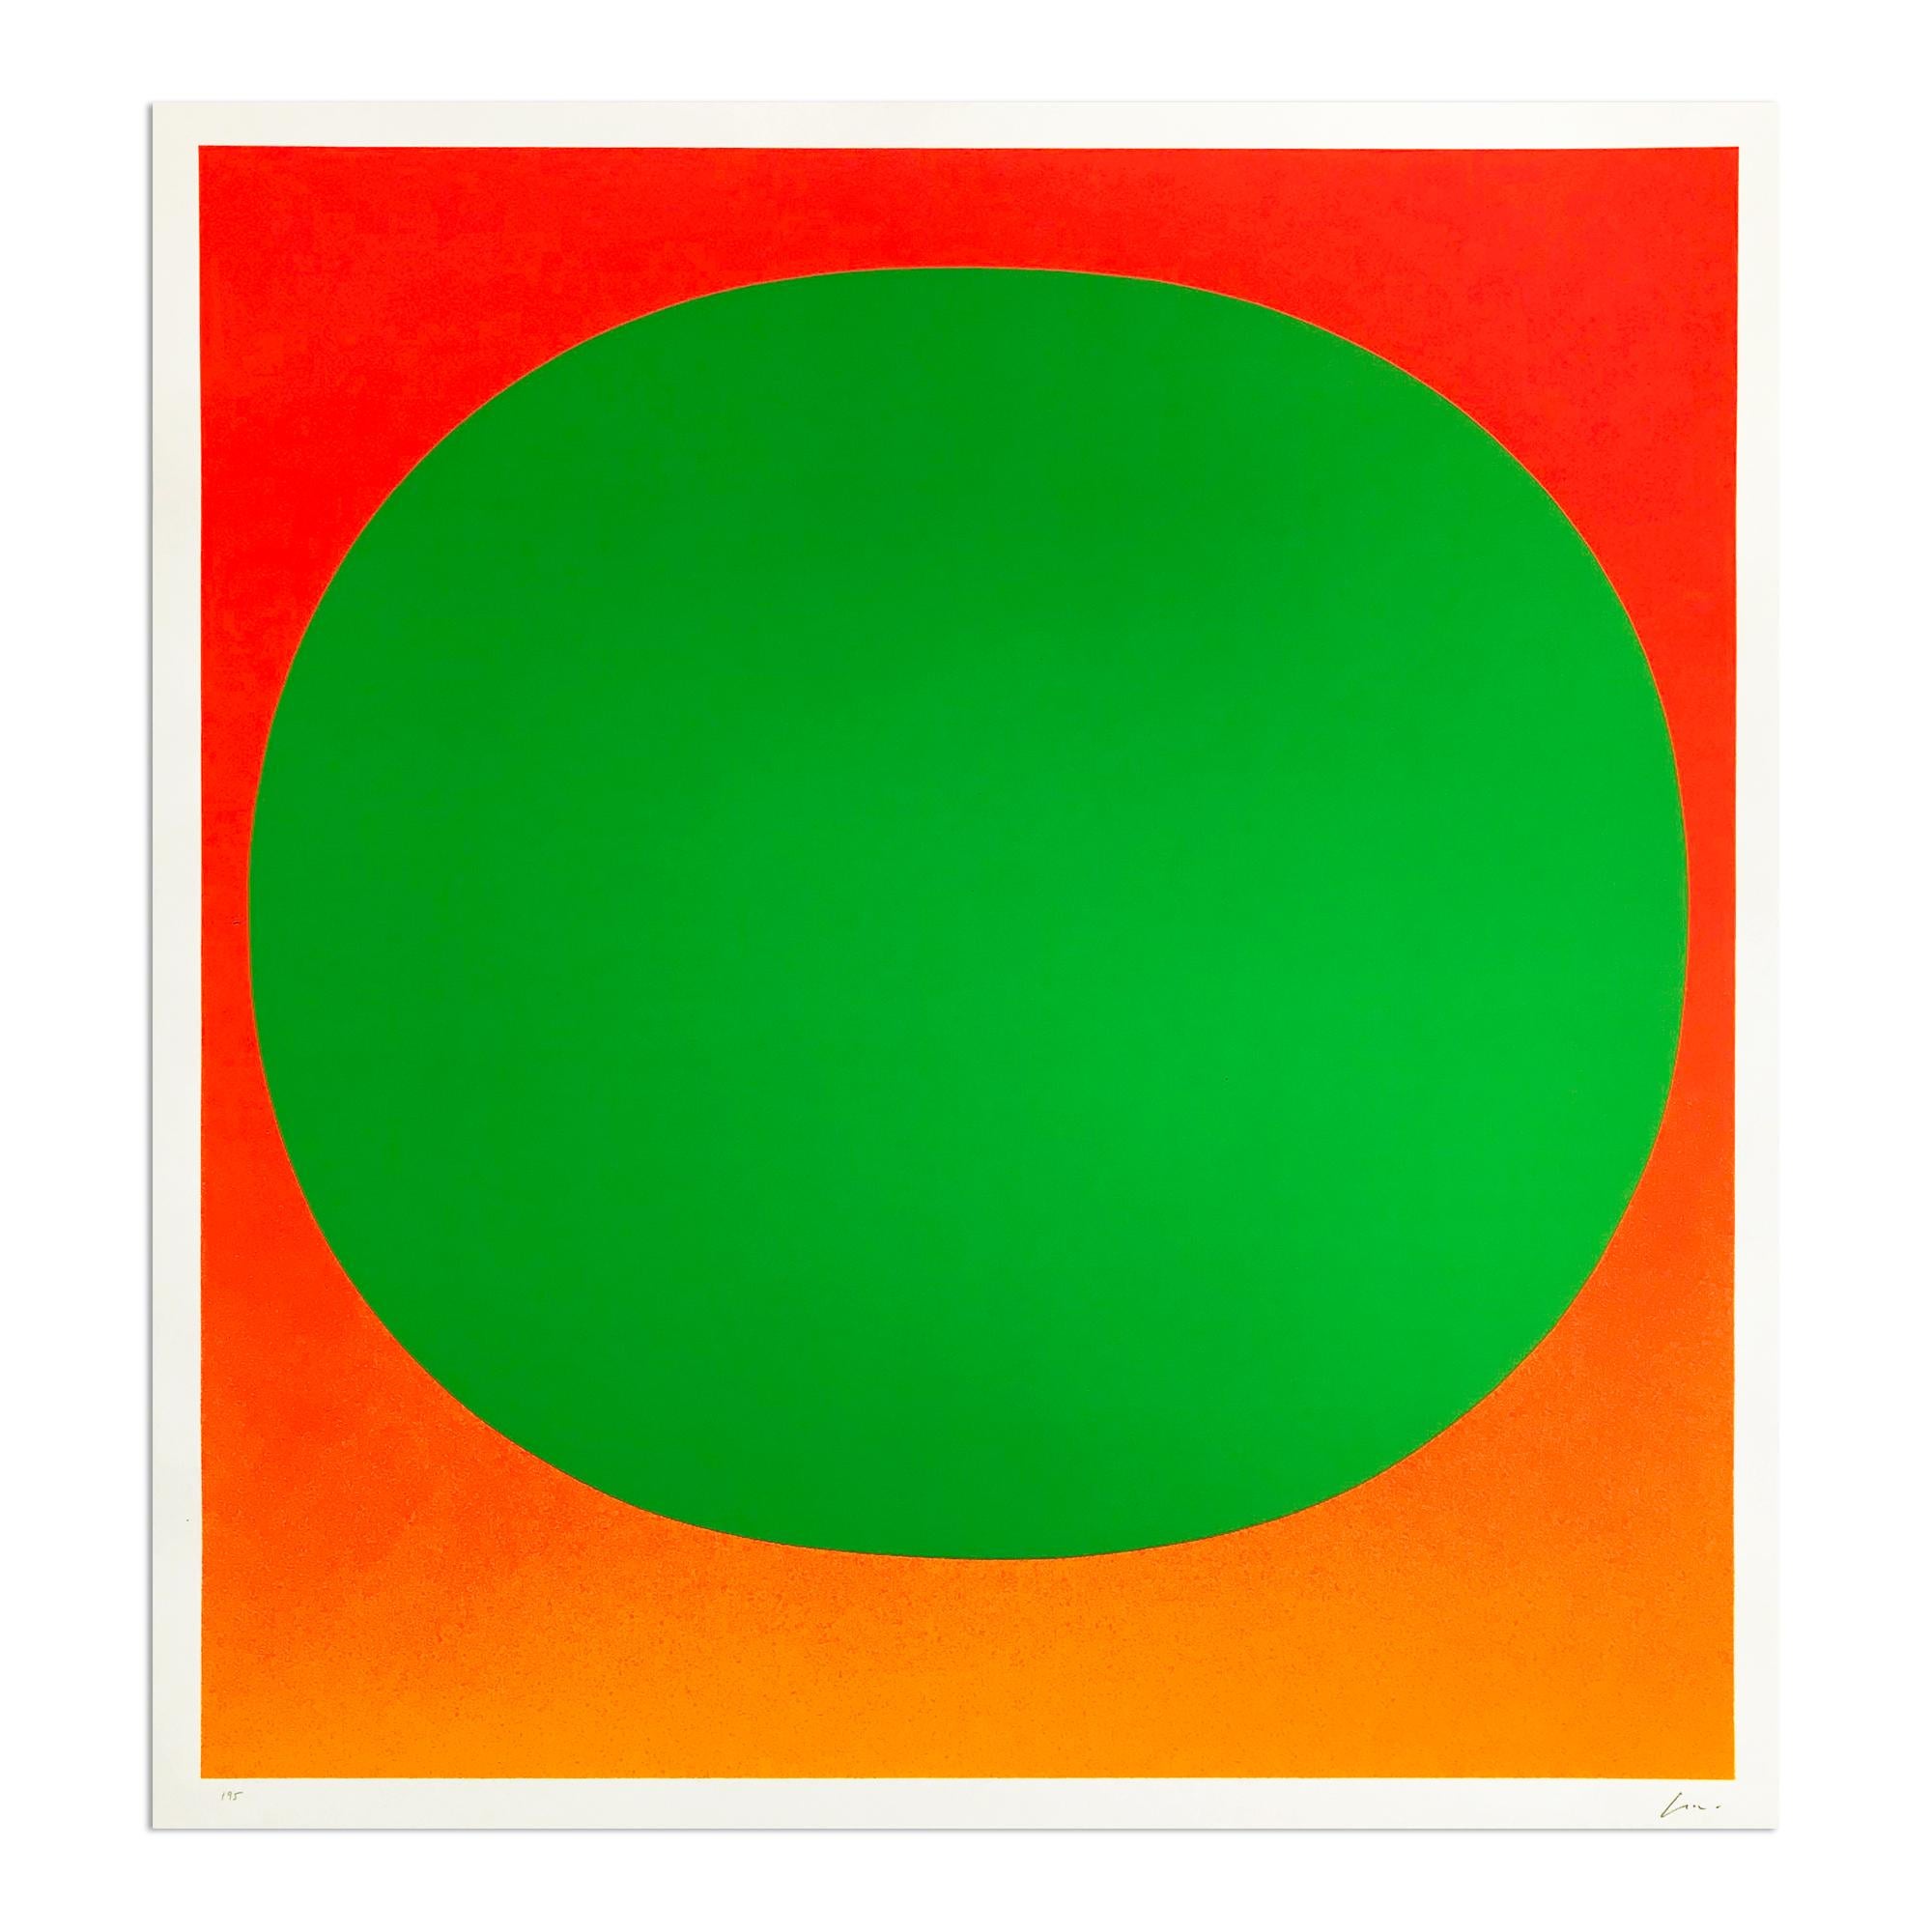 Rupprecht Geiger (German, 1908-2009)
Orange on Yellow (from "Colour in the Round"), 1969
Medium: Silkscreen in colours, on thin cardboard
Dimensions: 28 × 26 in (71 × 66 cm)
Edition of 95: Hand-signed and numbered
Condition: Very good